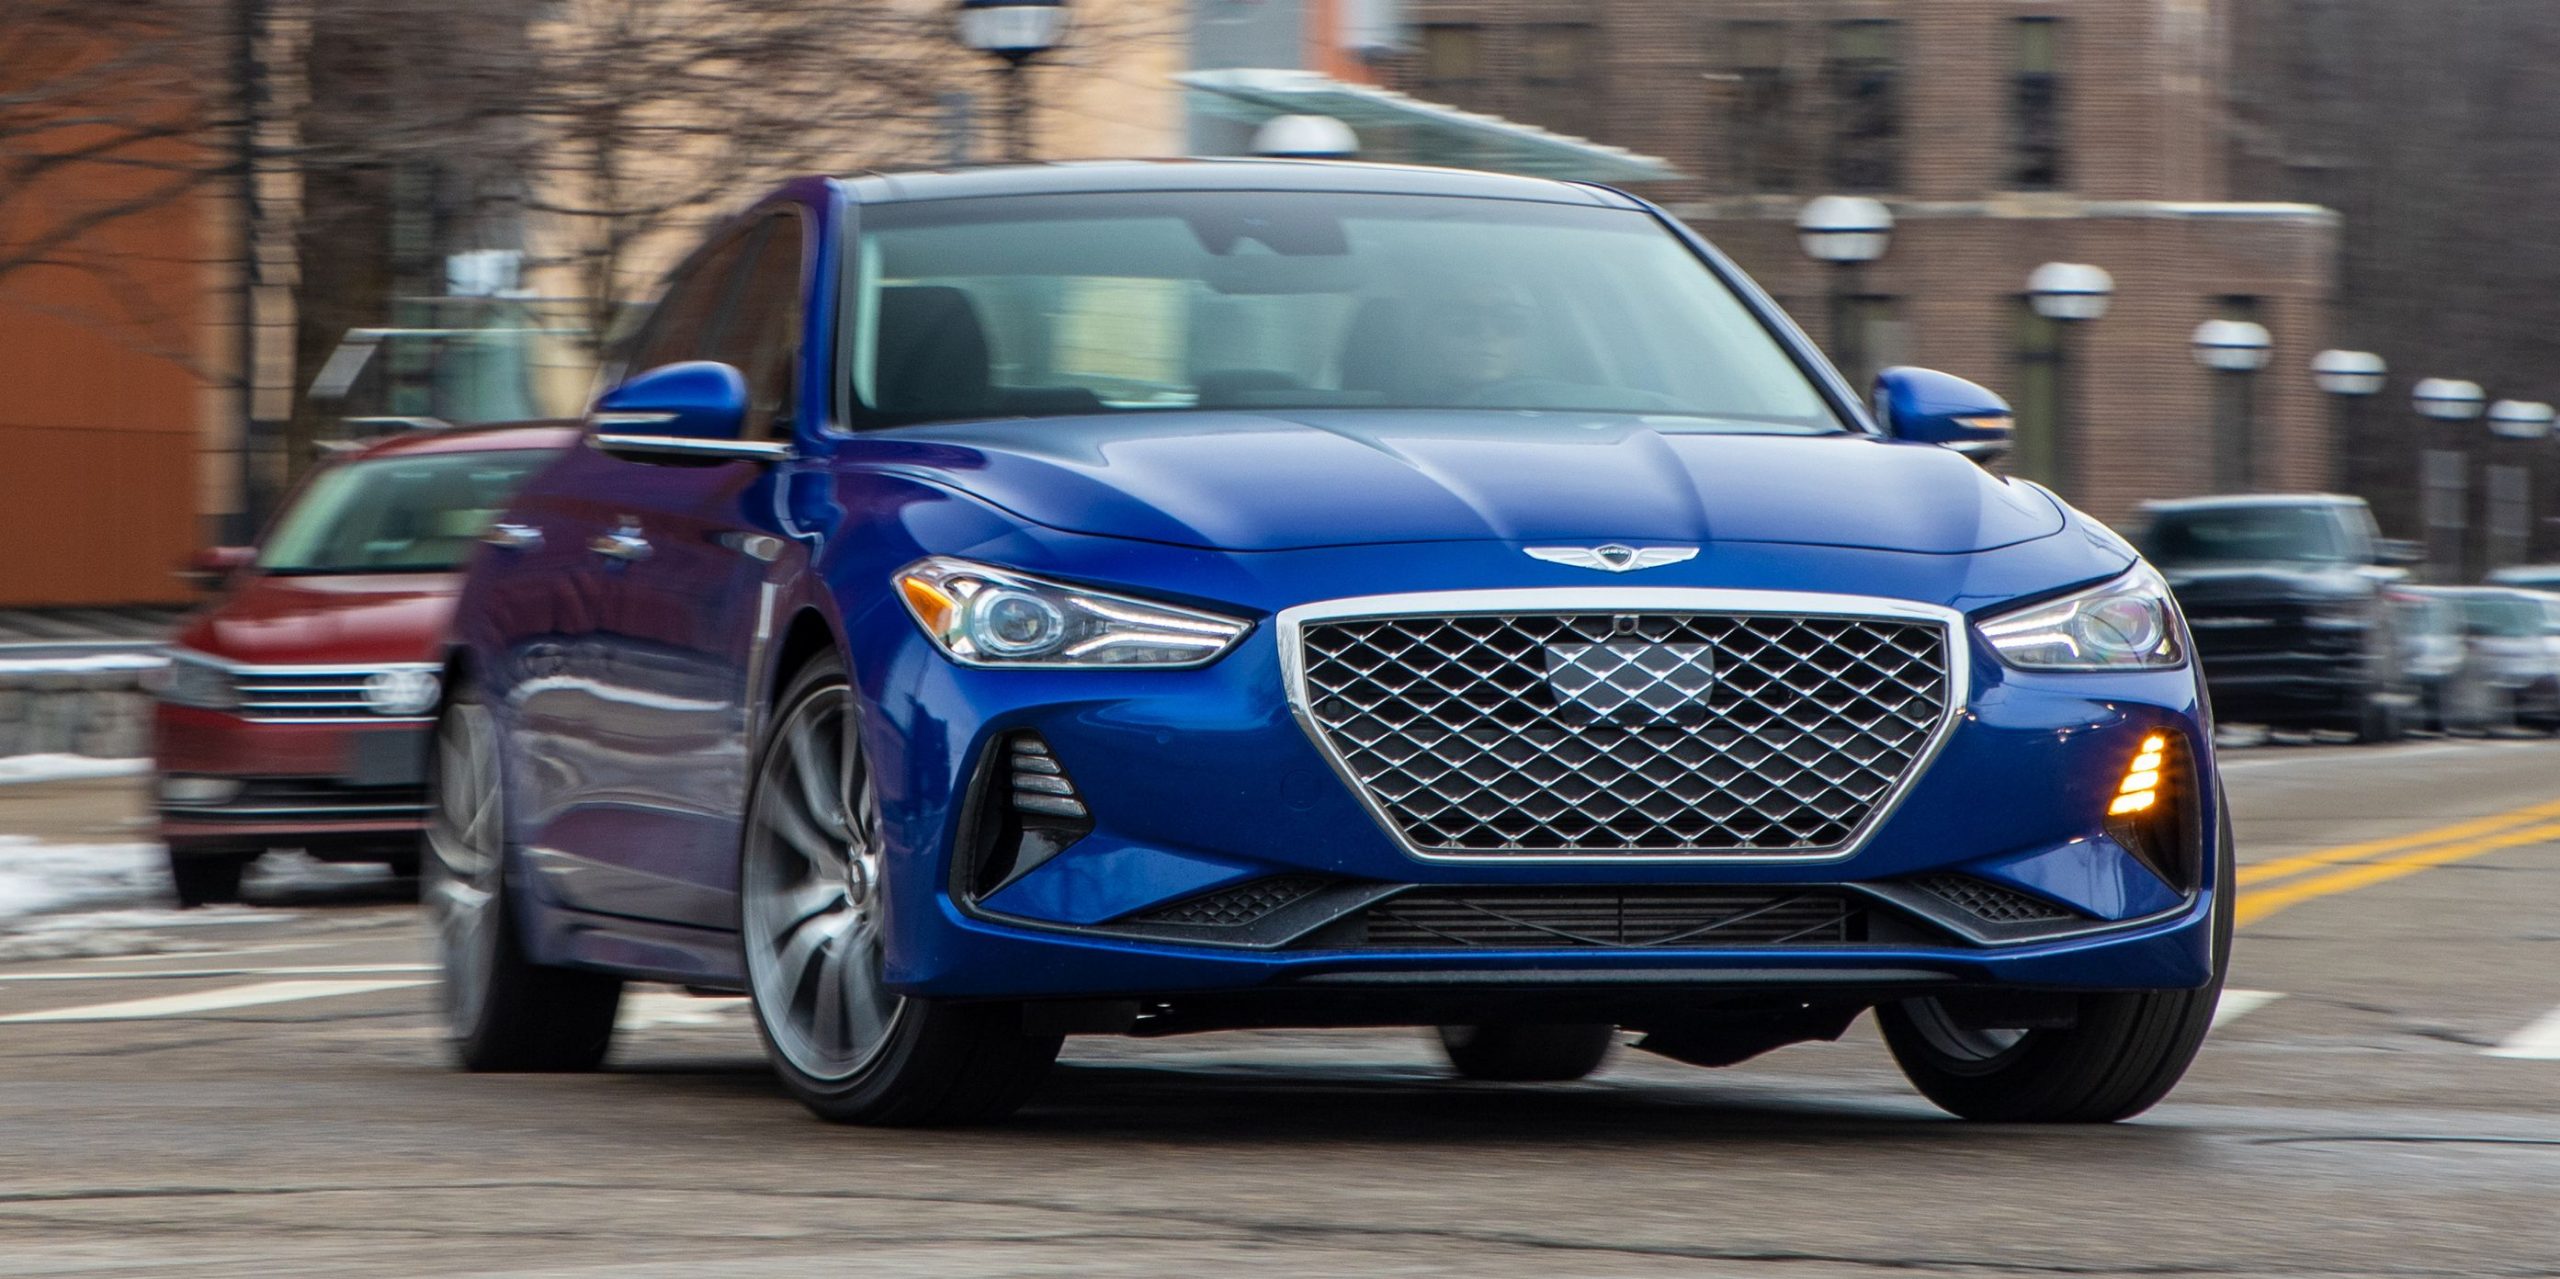 Our 2019 Genesis G70 Finally Stretches Its Legs